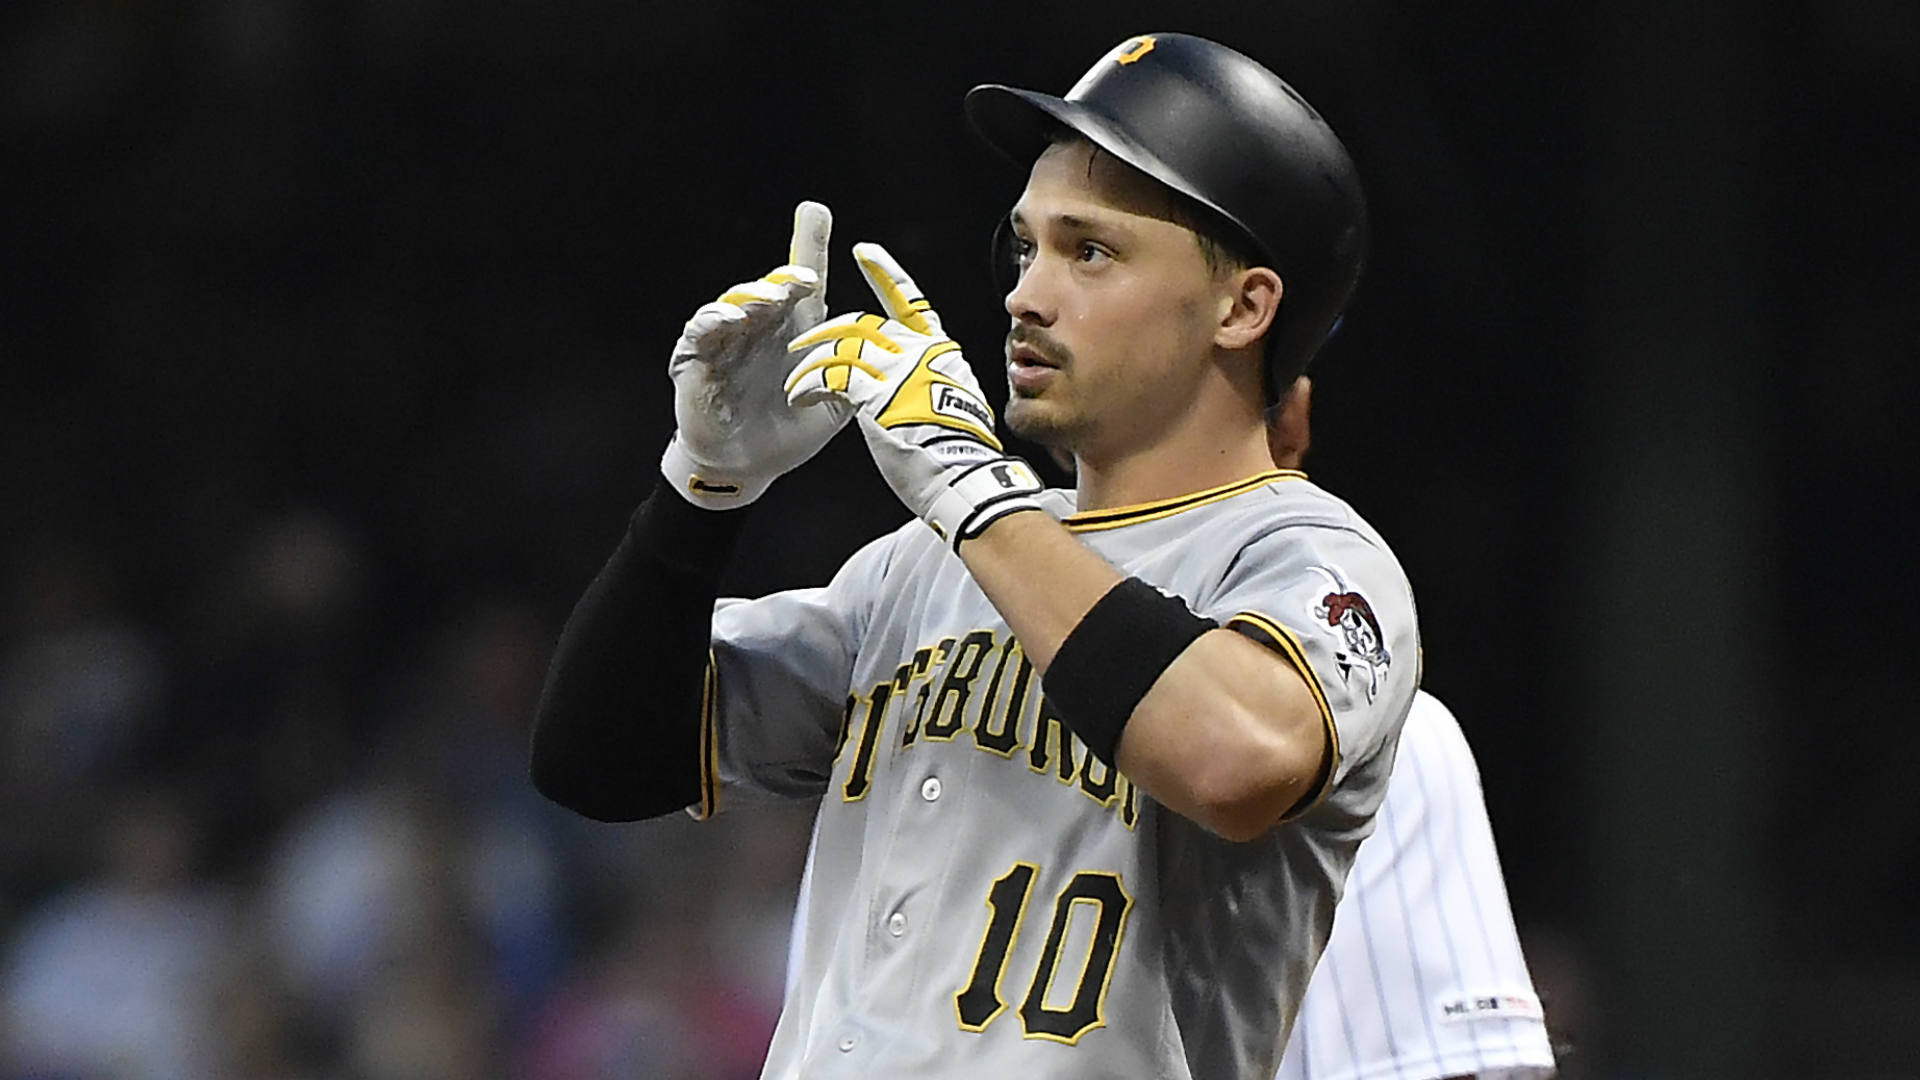 Pirates' Bryan Reynolds is an overlooked rookie standout — and that's